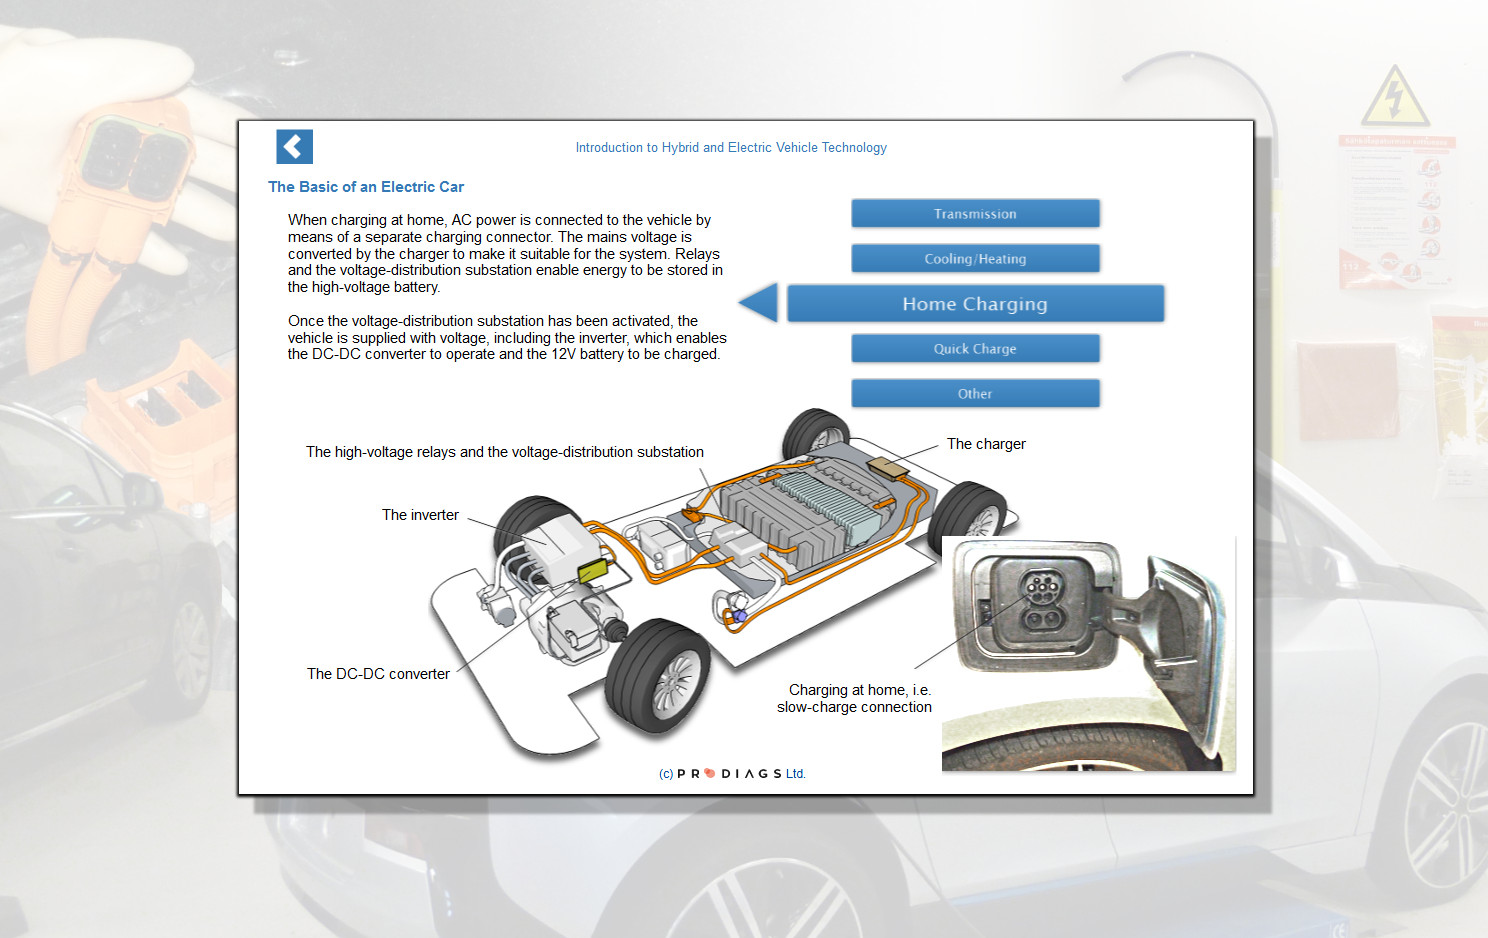 Learn how charging a hybrid or electric vehicle works with this online training module for mechanics and others working in workshops or the automotive industry.